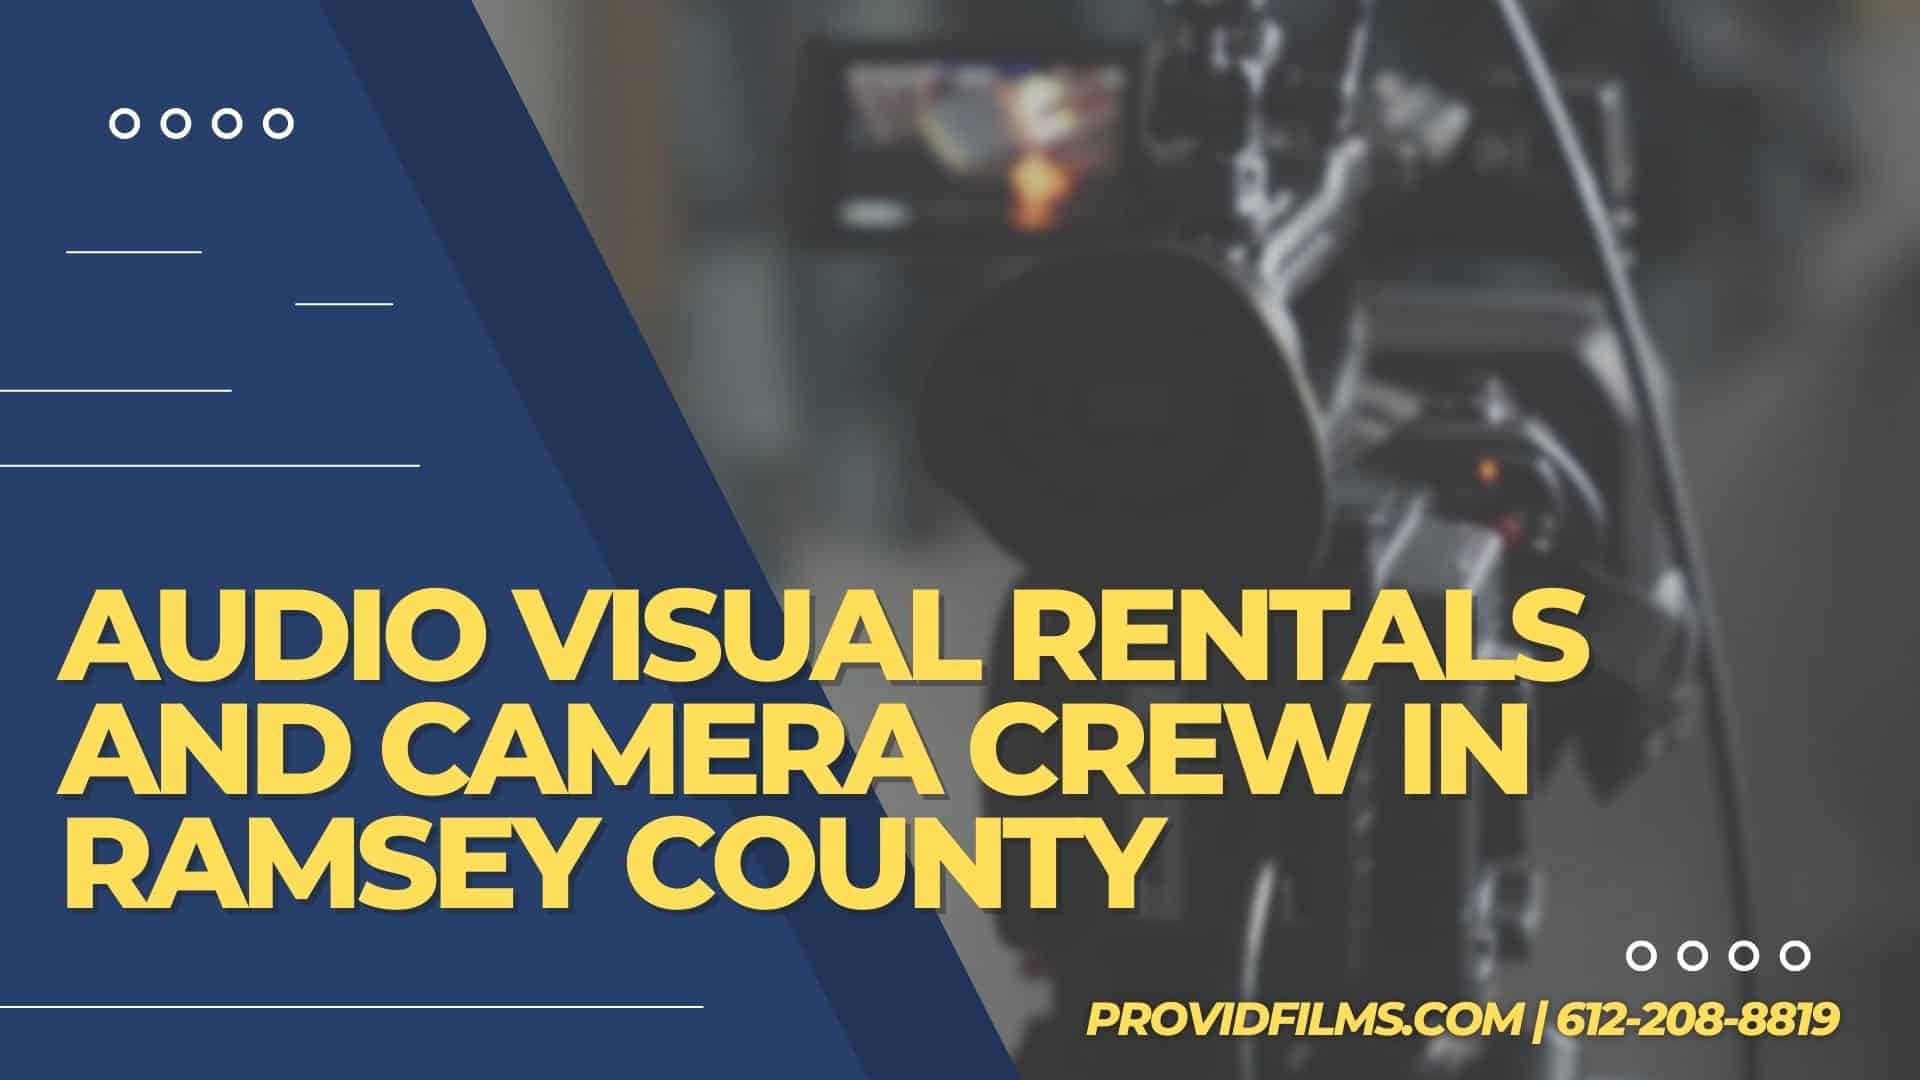 Graphic with text showing a camera crew with gear and the text "AV Rental and Camera Crew in Ramsey County MN"